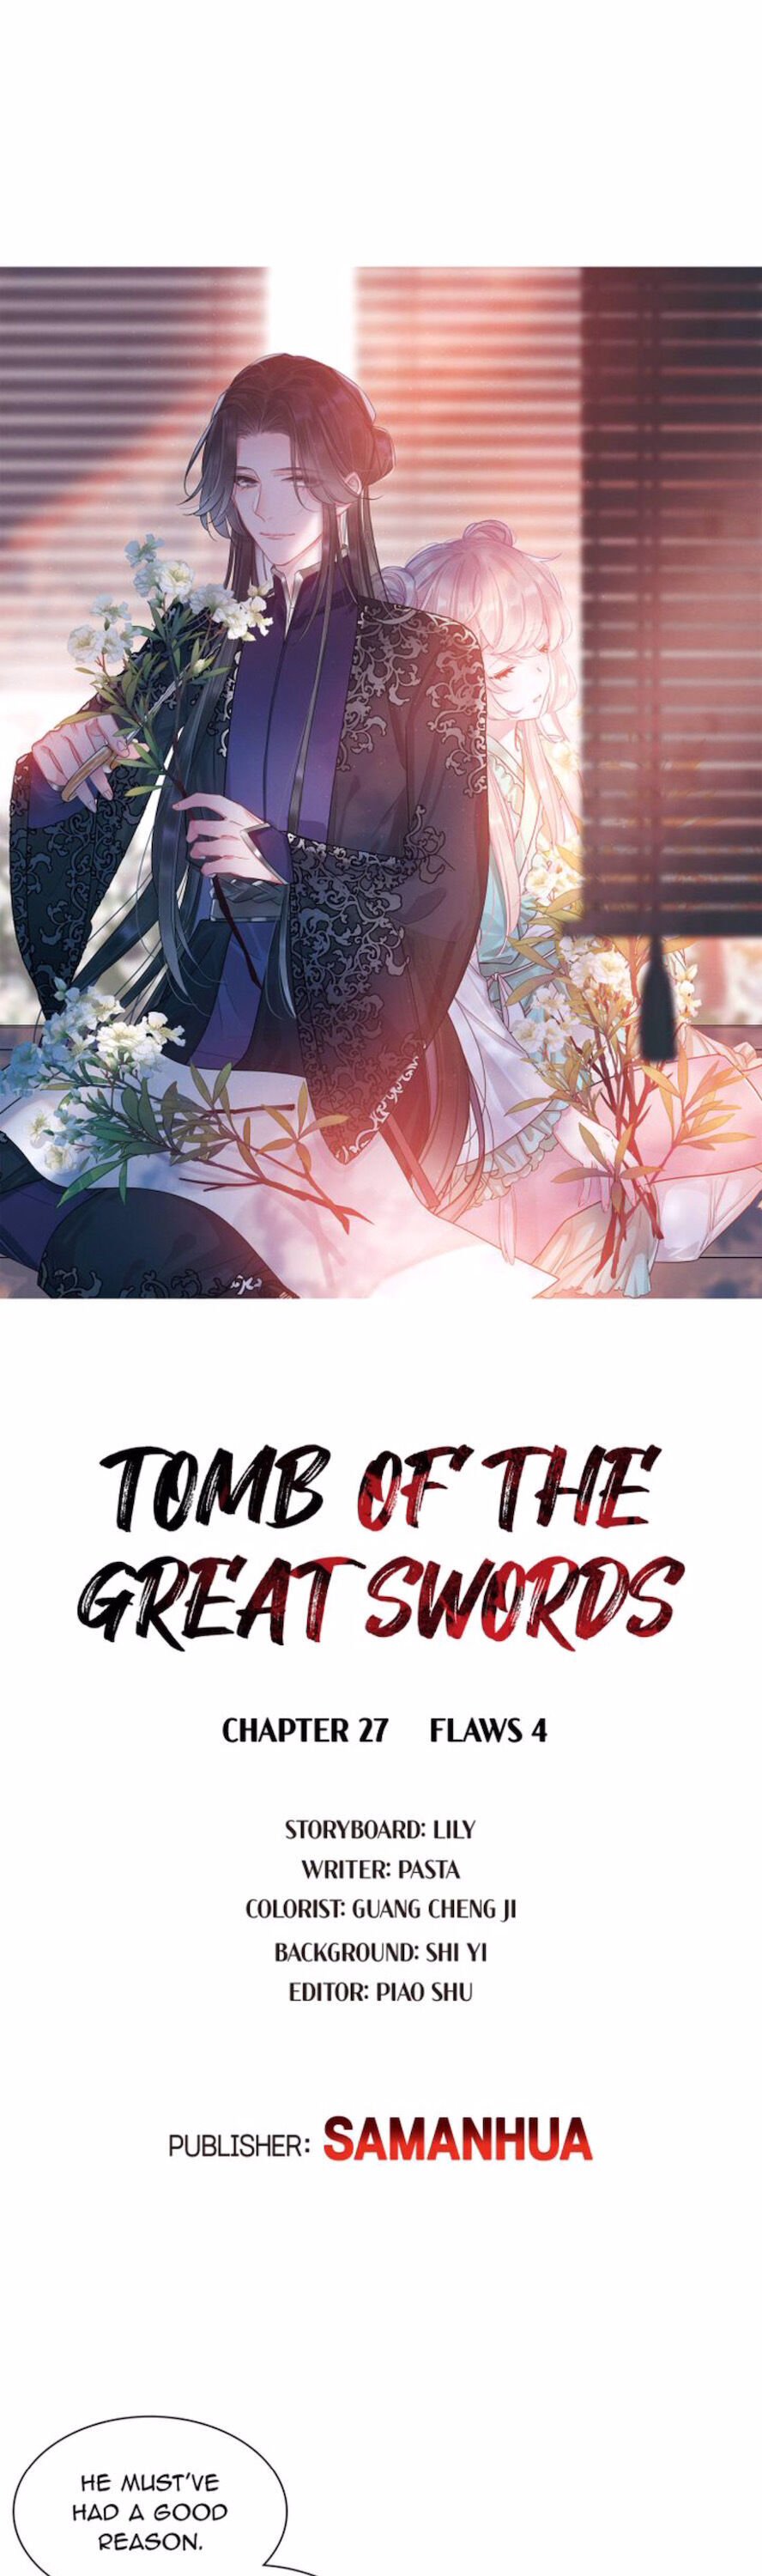 The Tomb of Famed Swords chapter 27